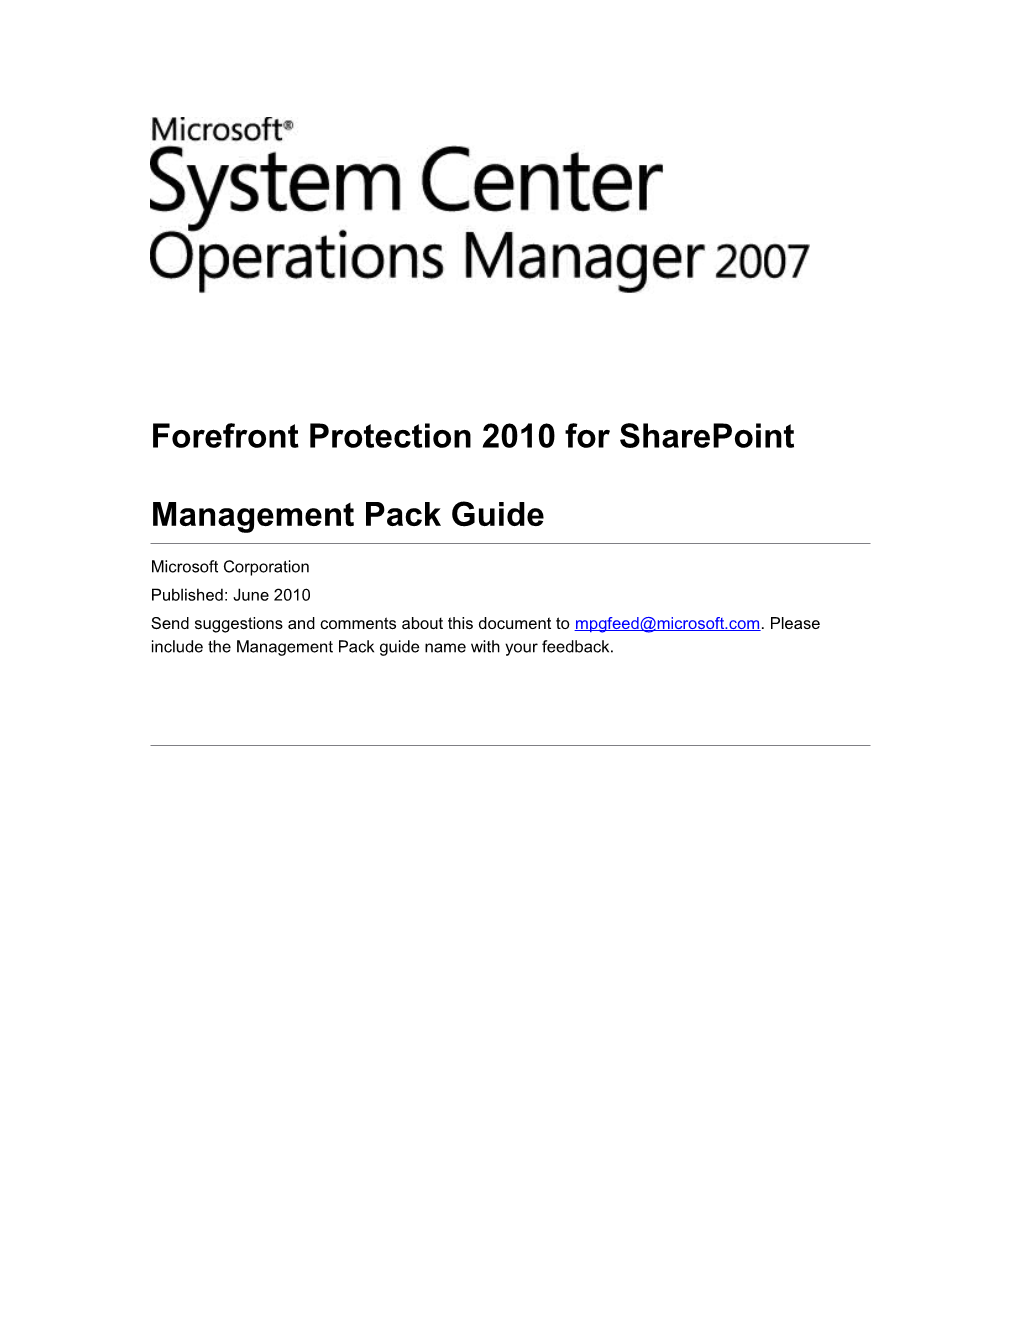 Forefront Protection 2010 for Sharepoint